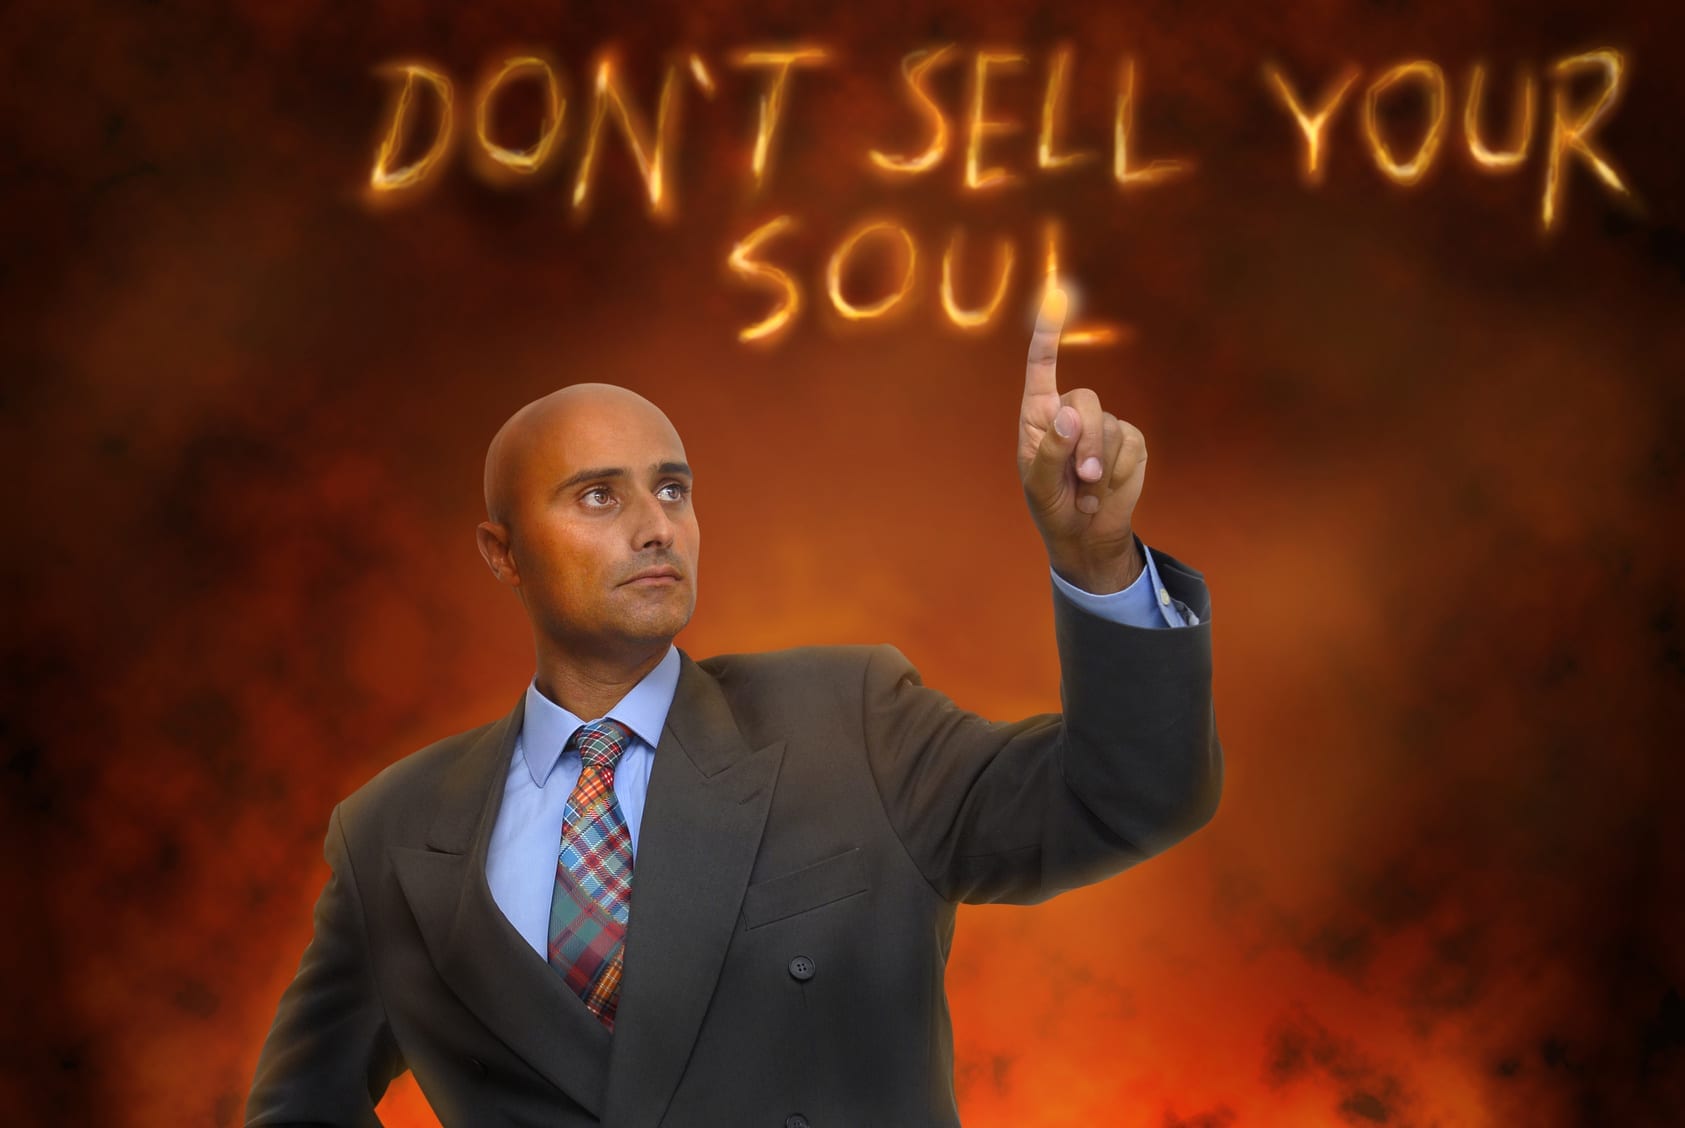 Man in hell writing in fiery letters, "Don't sell your soul."